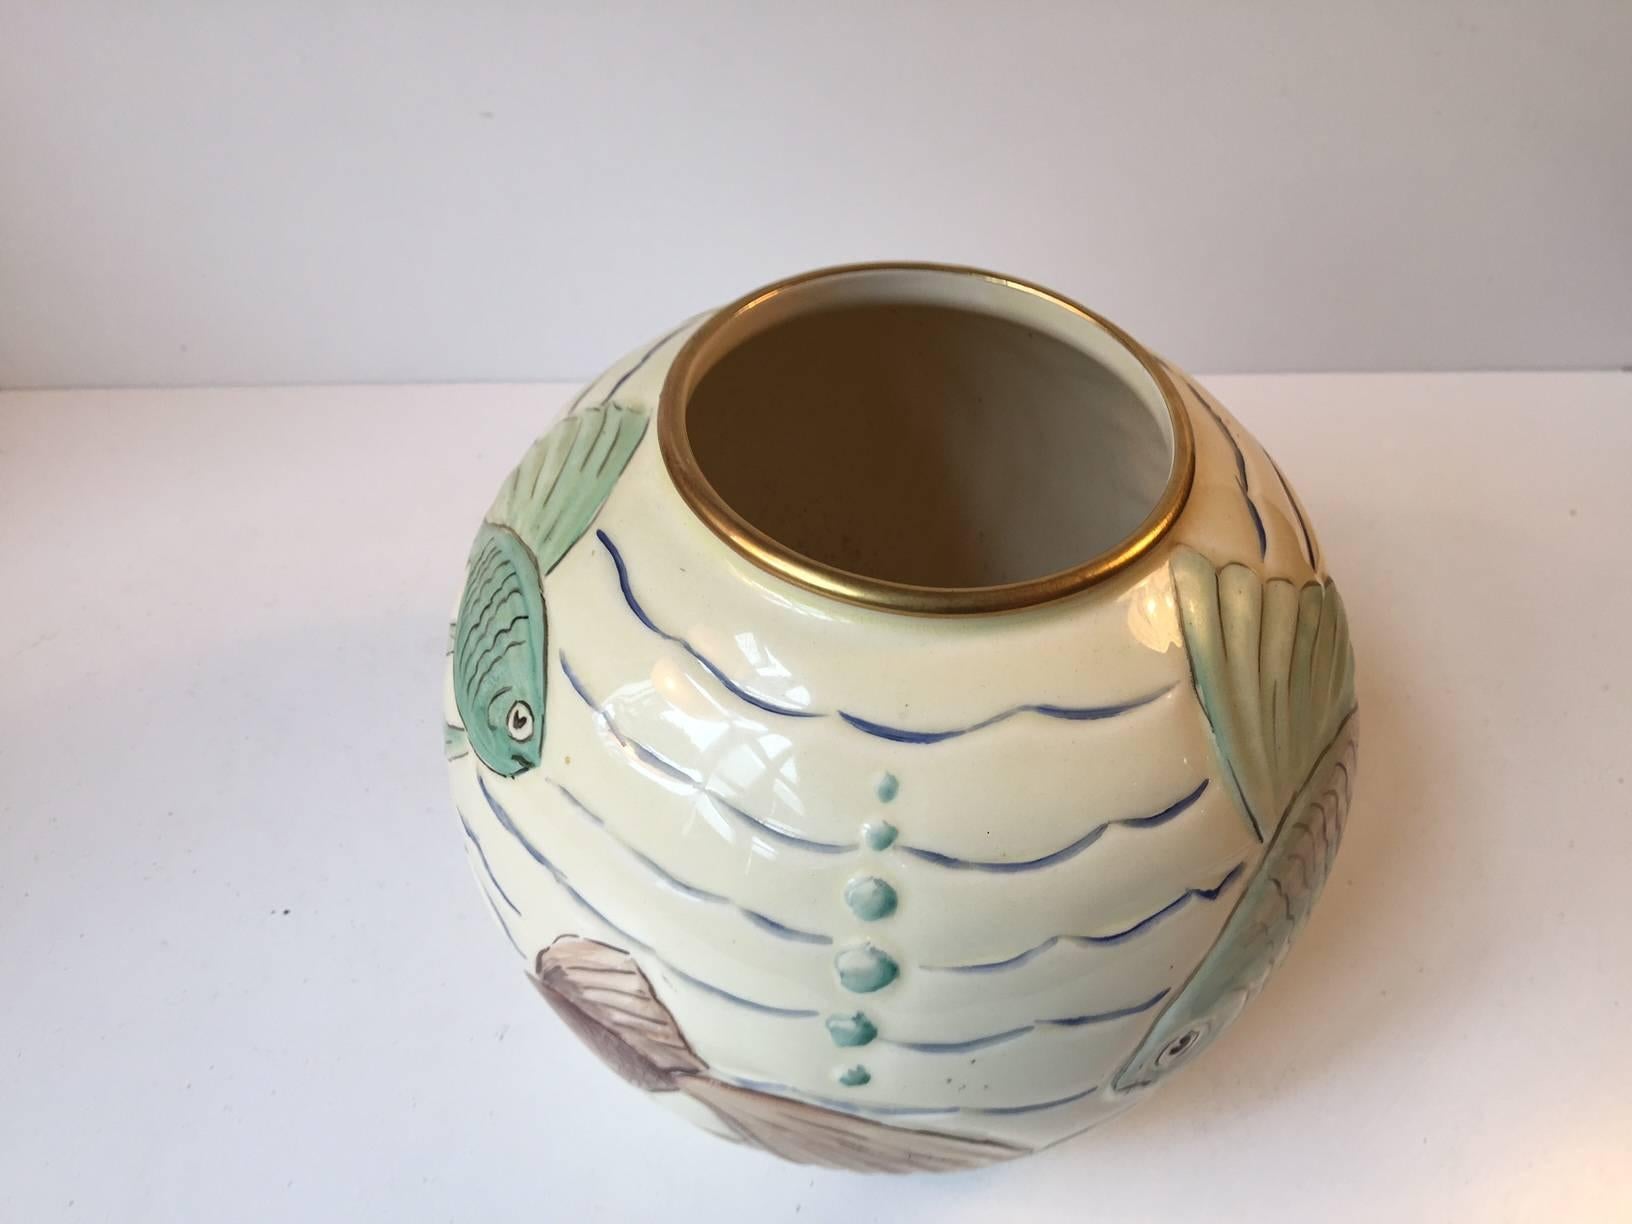 Mid-20th Century Art Deco Porcelain Ball Vase with 'Fish' Motif's by Spode's Royal Jasmine, 1930s